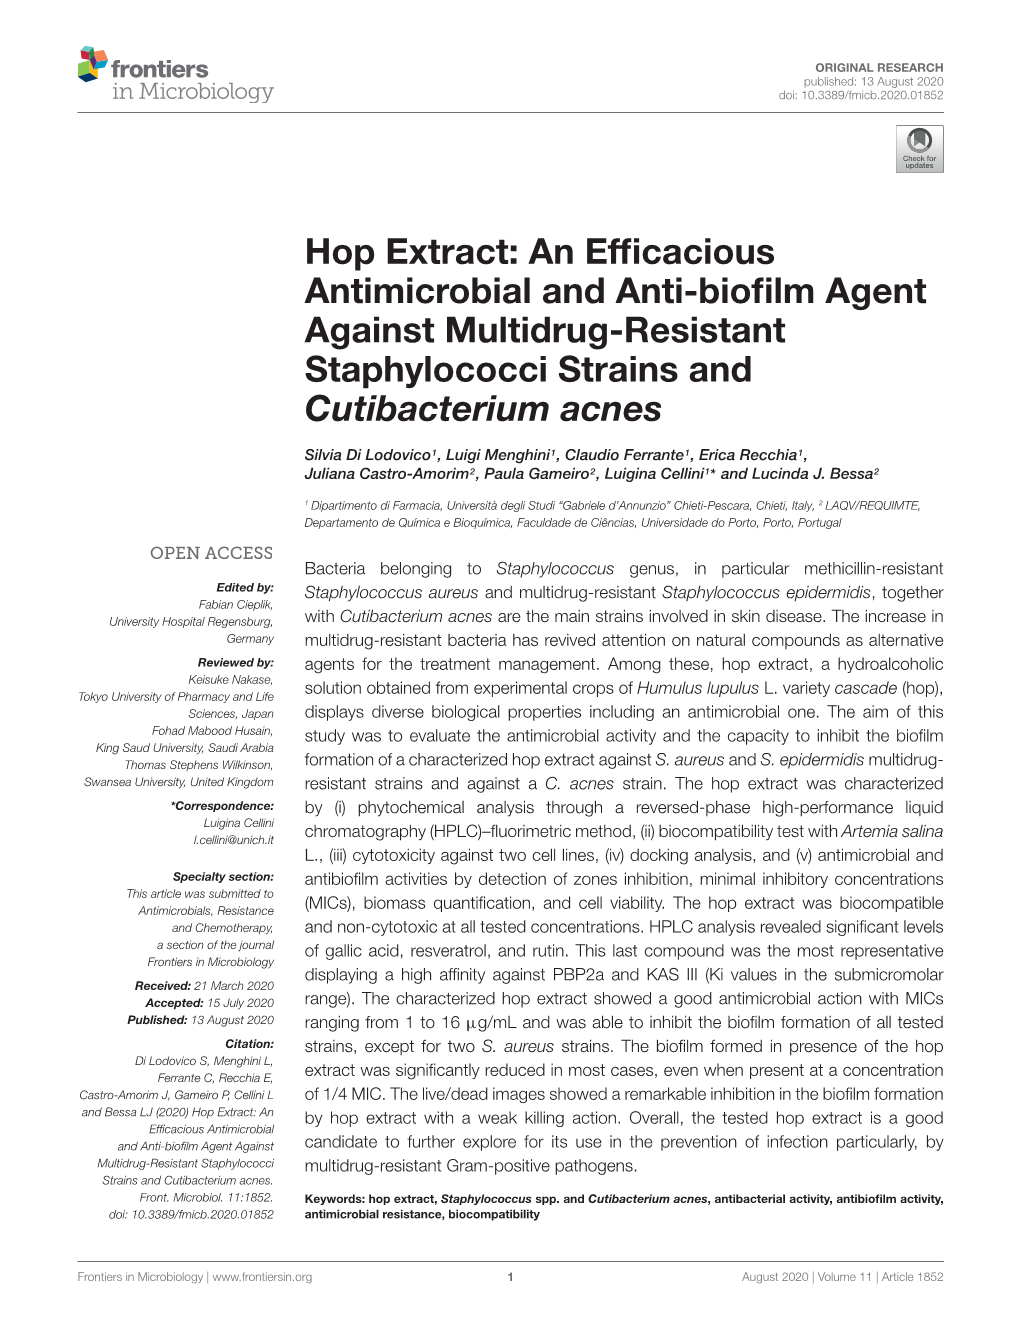 Hop Extract: an Efficacious Antimicrobial and Anti-Biofilm Agent